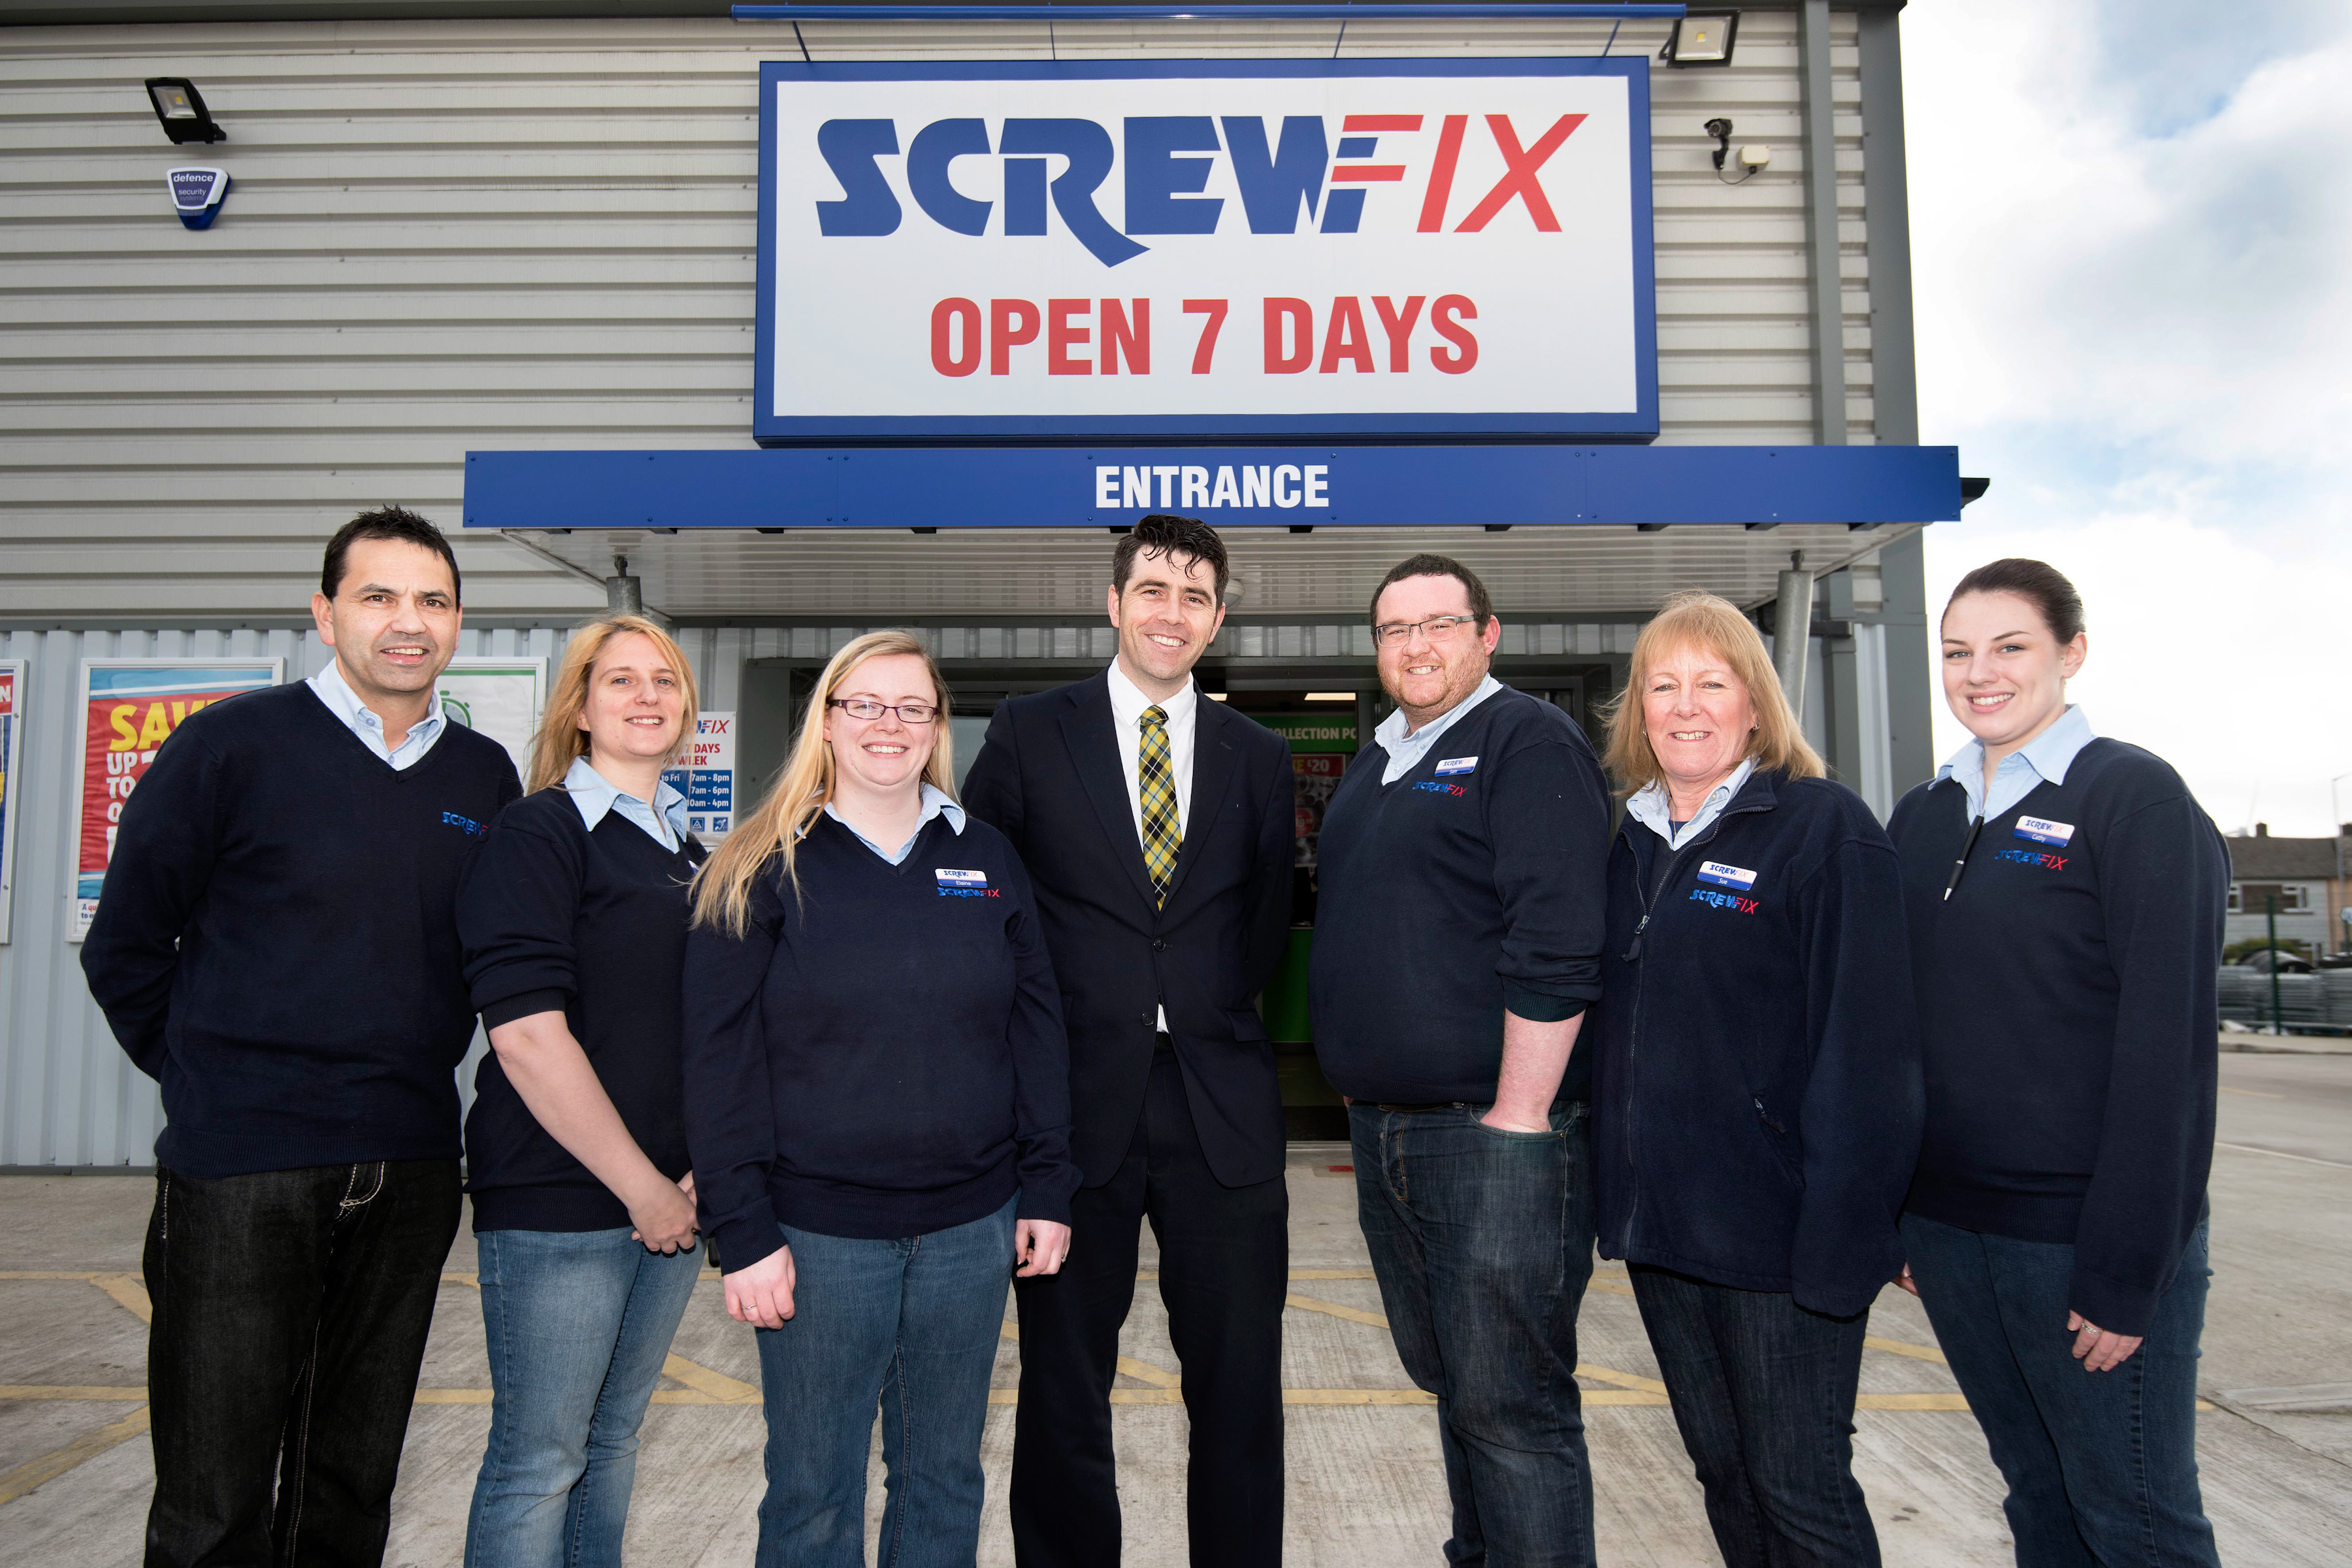 Scott Mann MP from North Cornwall visits new Screwfix store